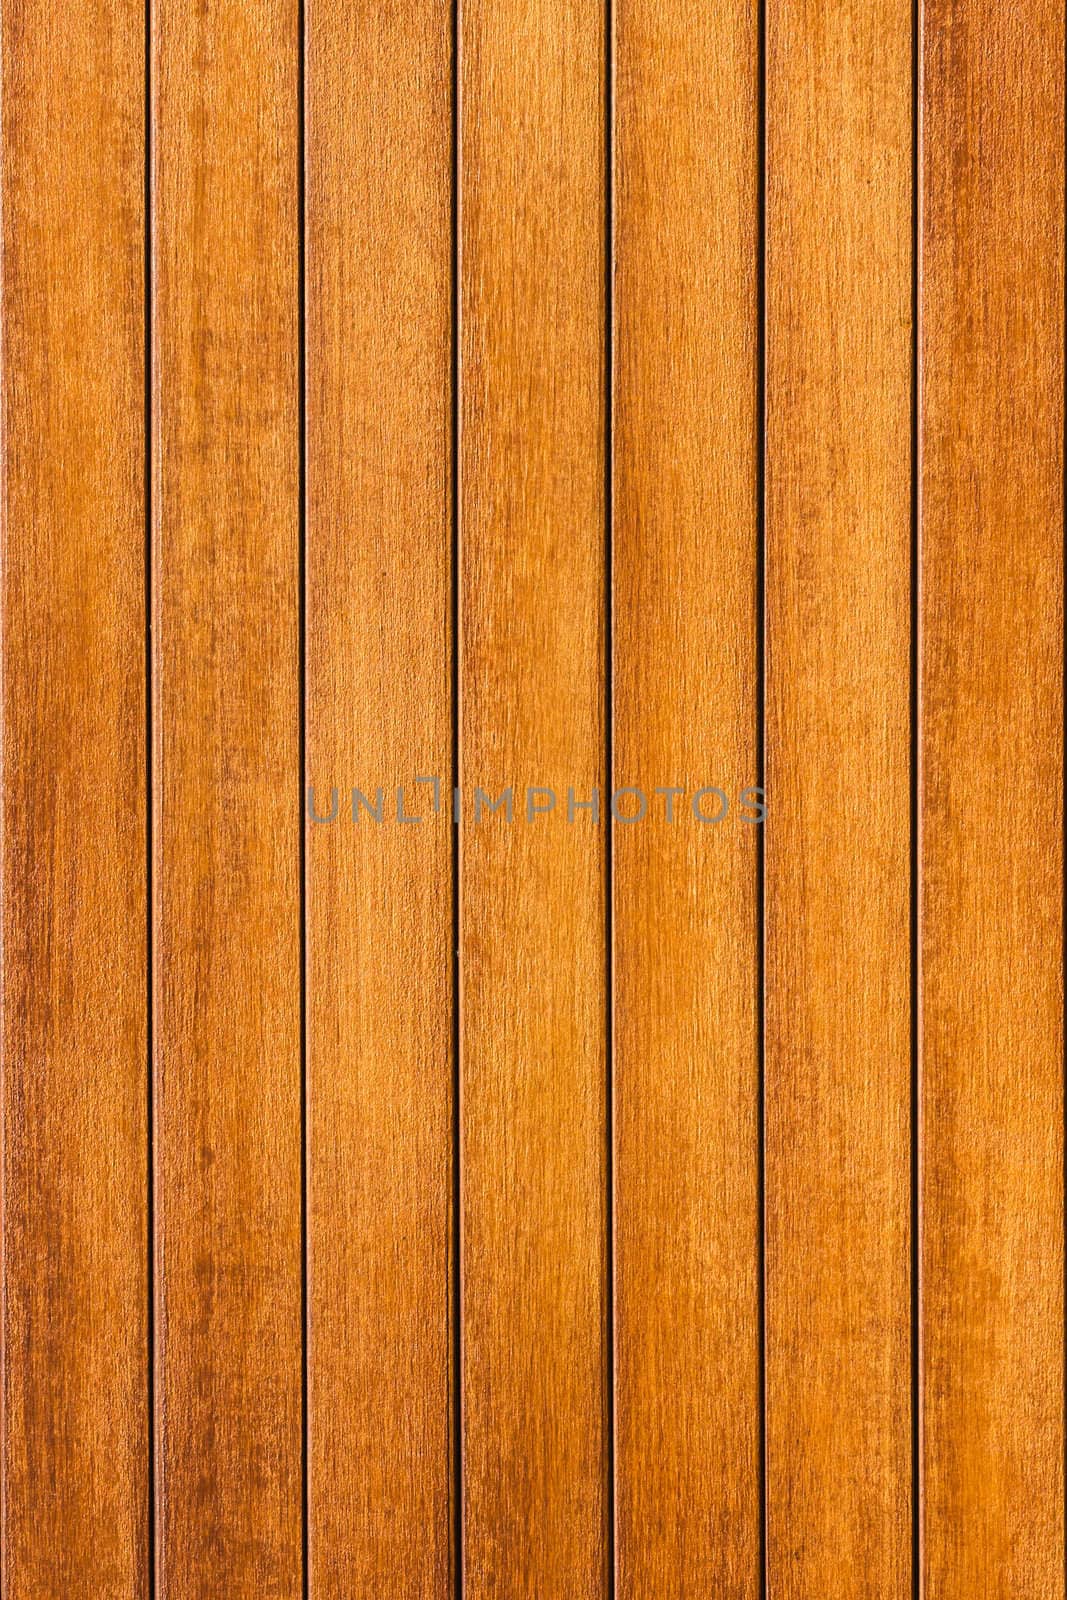 Brown Wood Wall in  Vertical Pattern,  Natural Color.